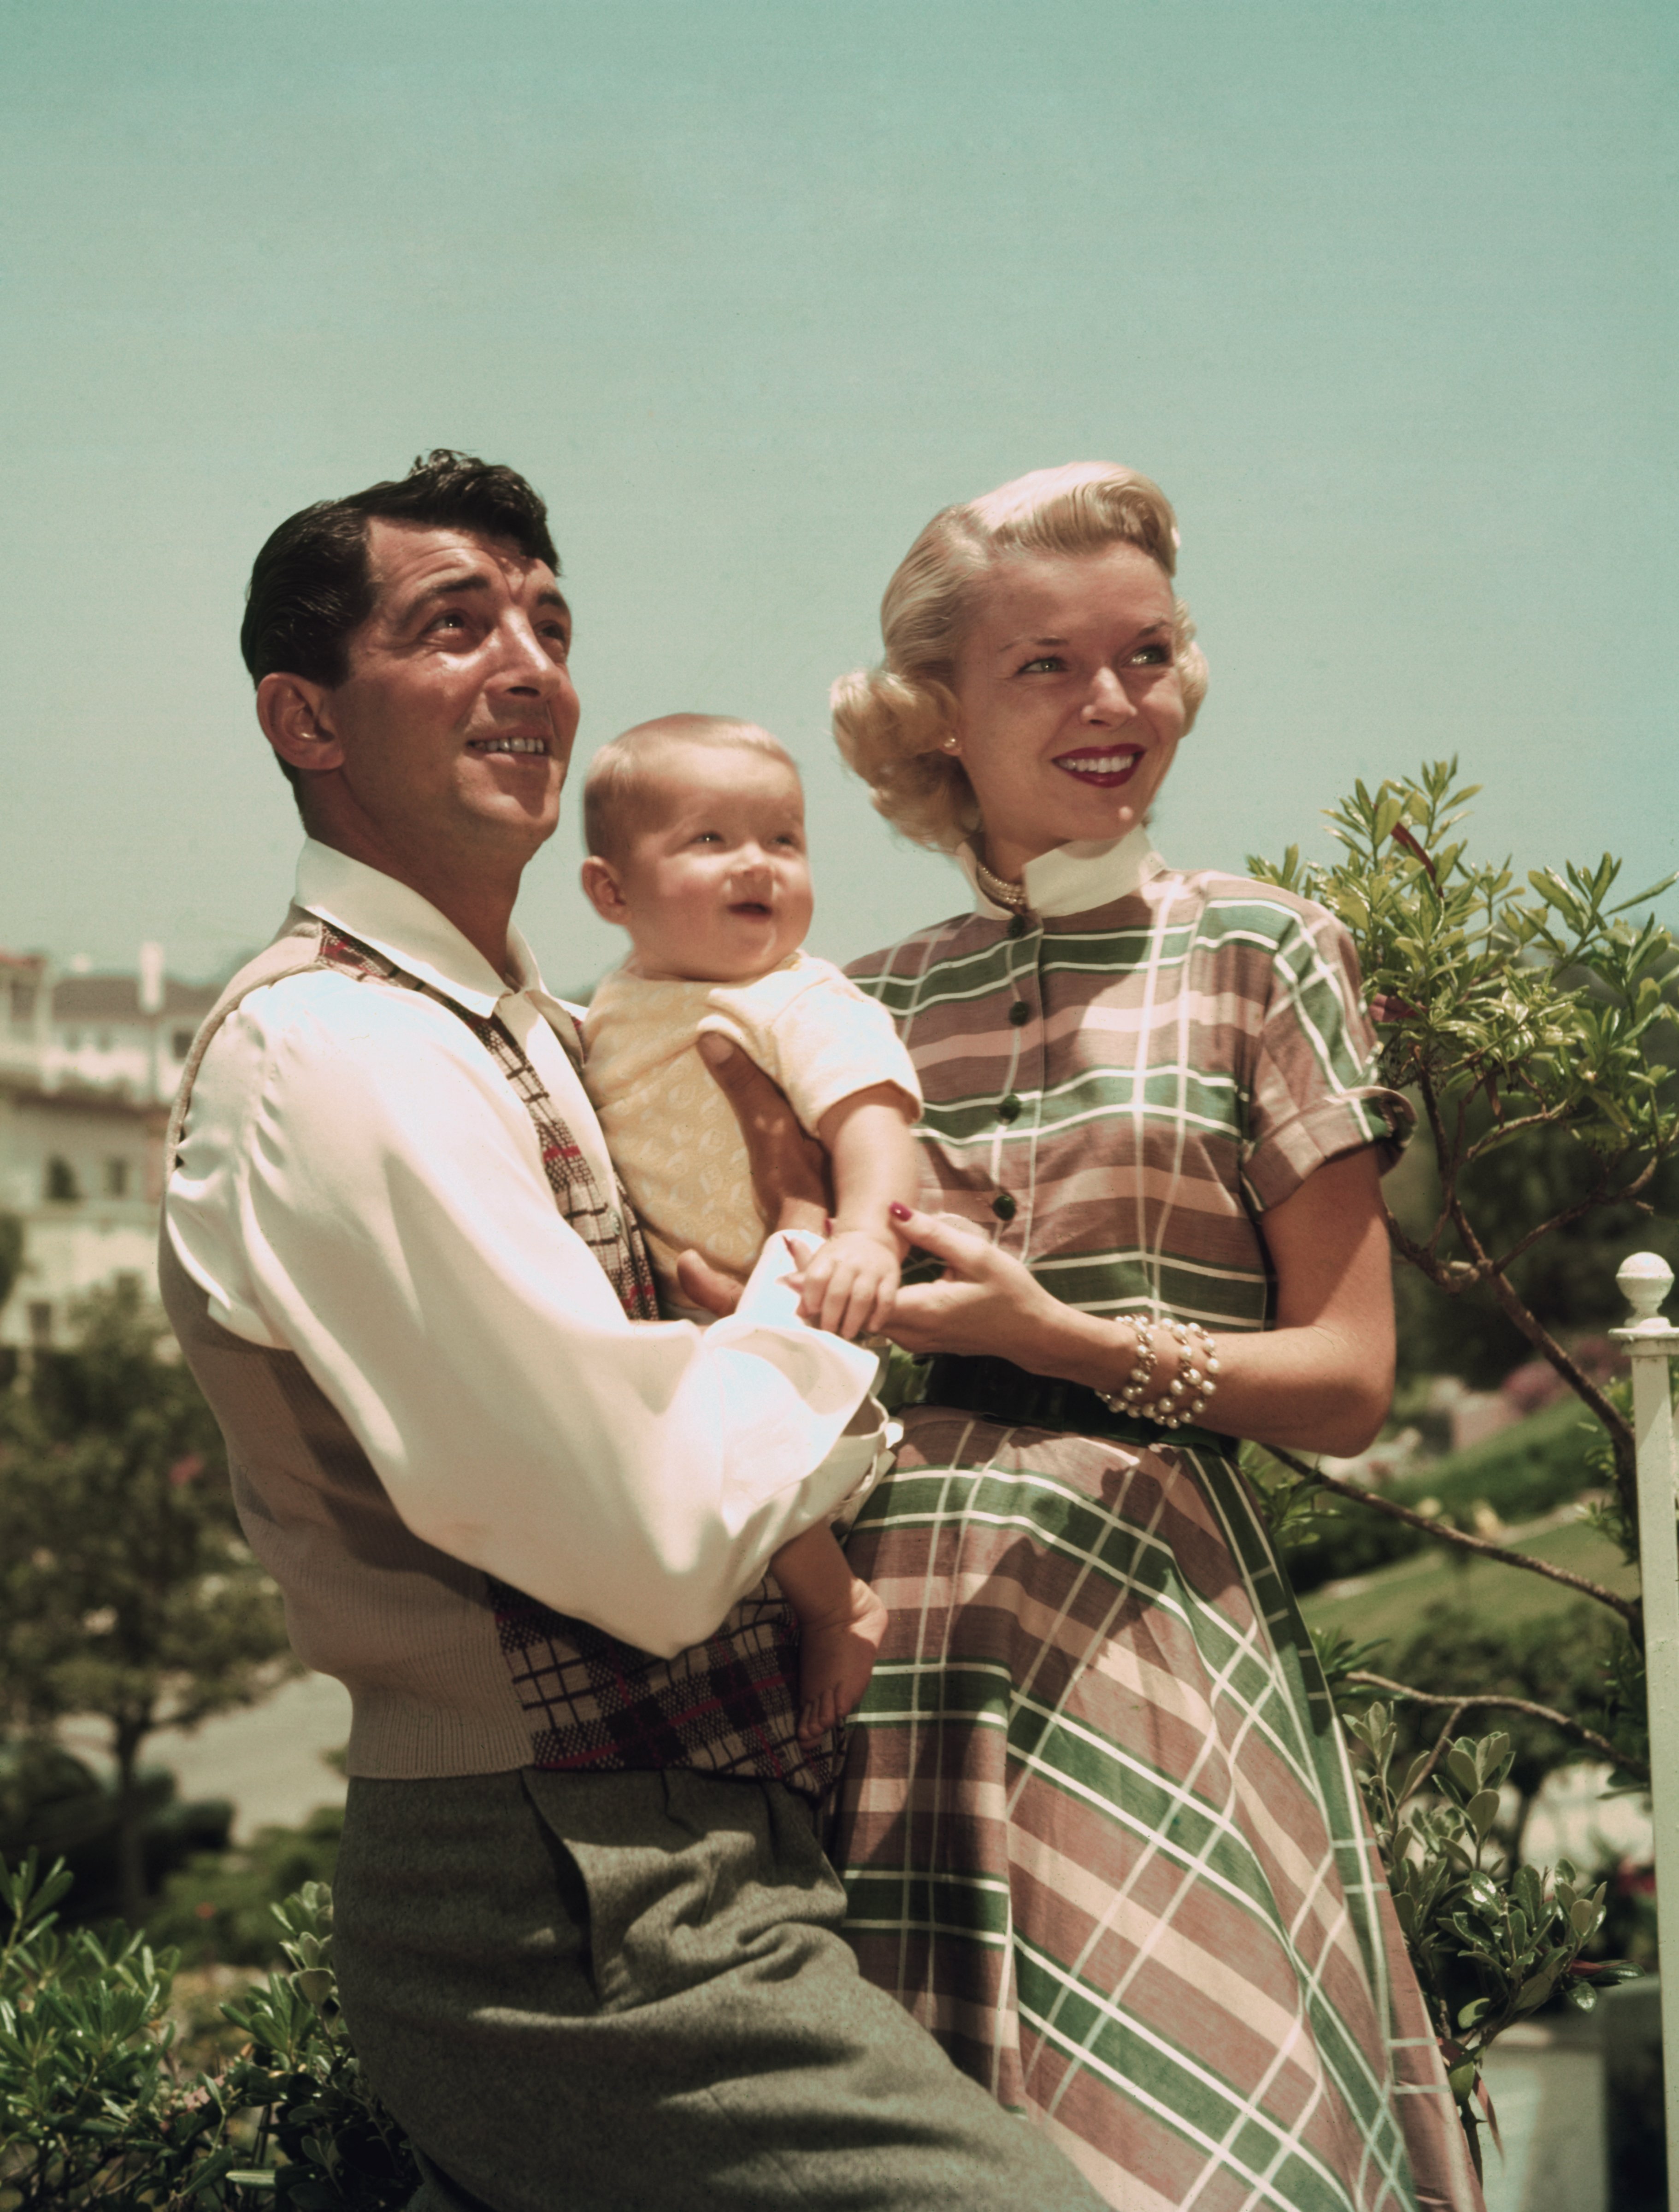 Actor and singer Dean Martin with ex-wife, Jeanne Biegger, and one of their children in the 1950's. |Source: Getty Images